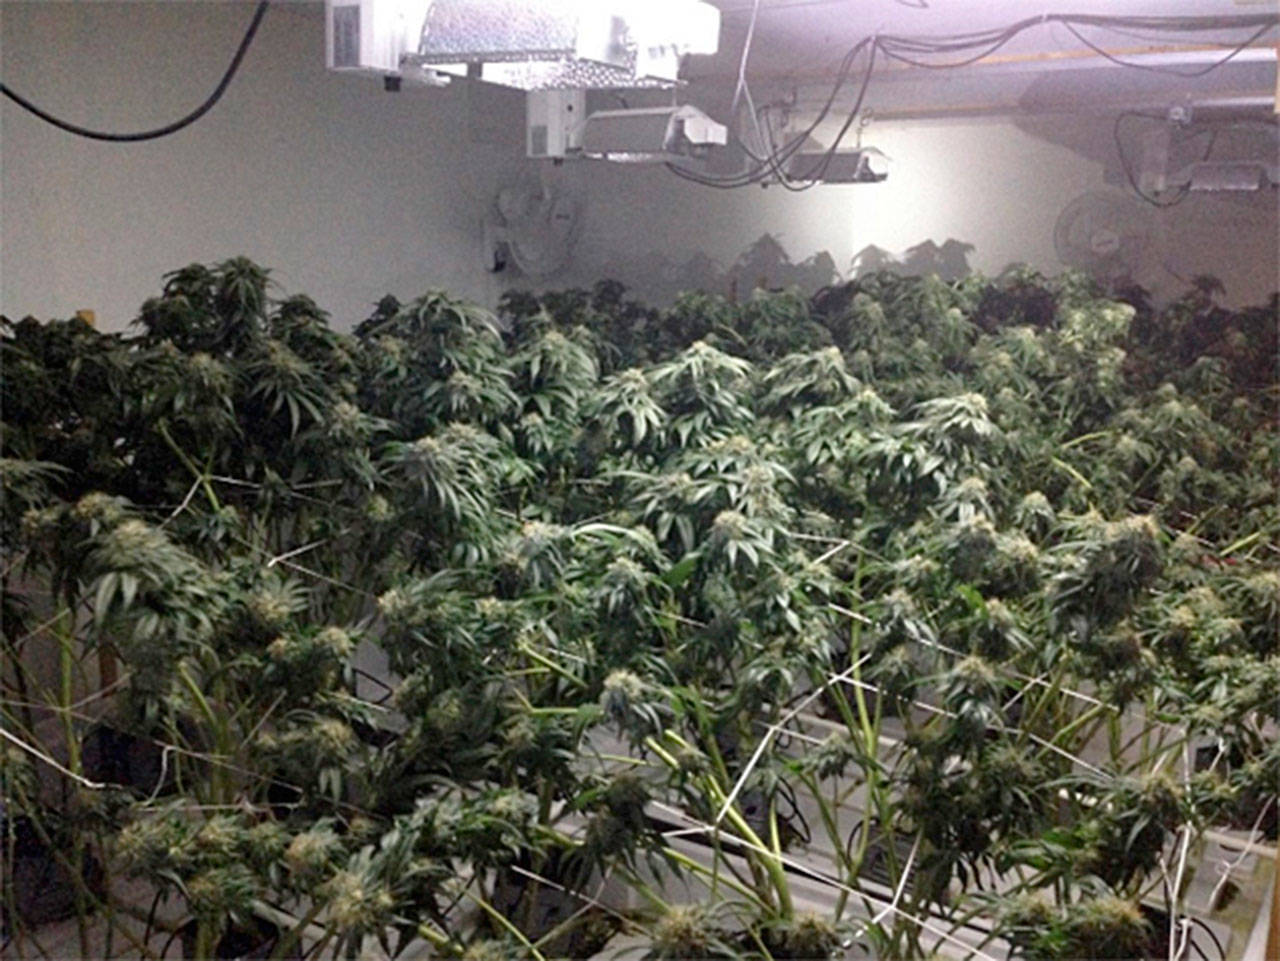 The scene inside of a house in the 14200 block of SE 38th St. Bellevue police found 775 marijuana plants (Photo courtesy of the Bellevue Police Department).